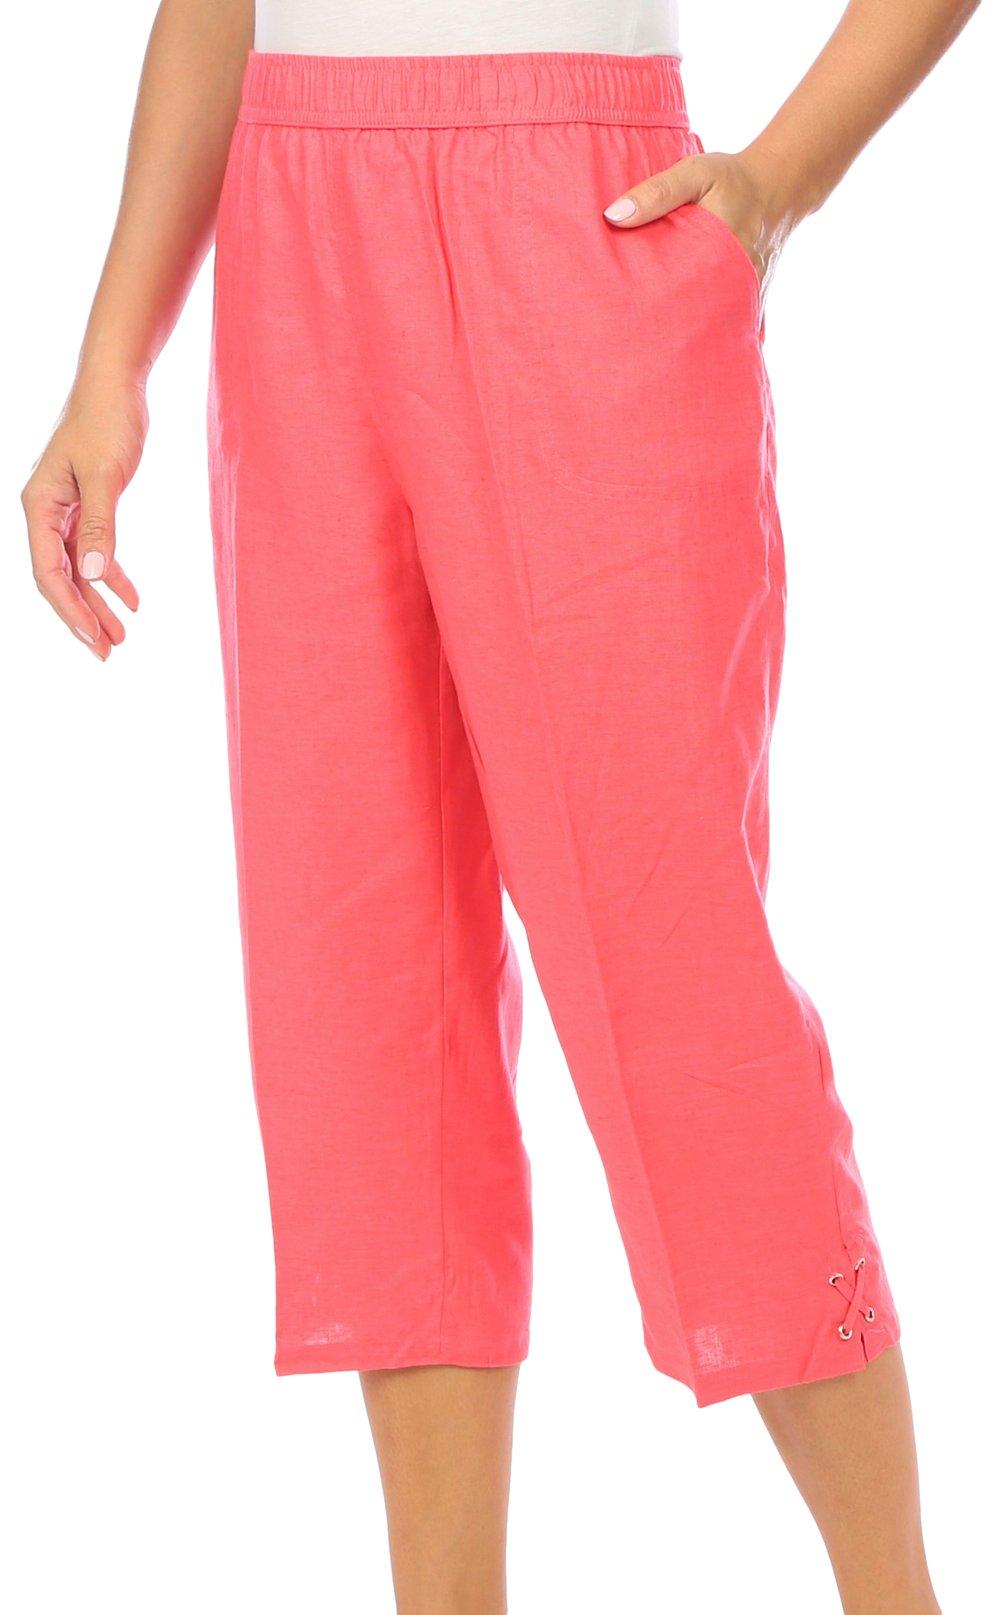 RECREATION Womens Coral CAPRIS Size 14 NWT